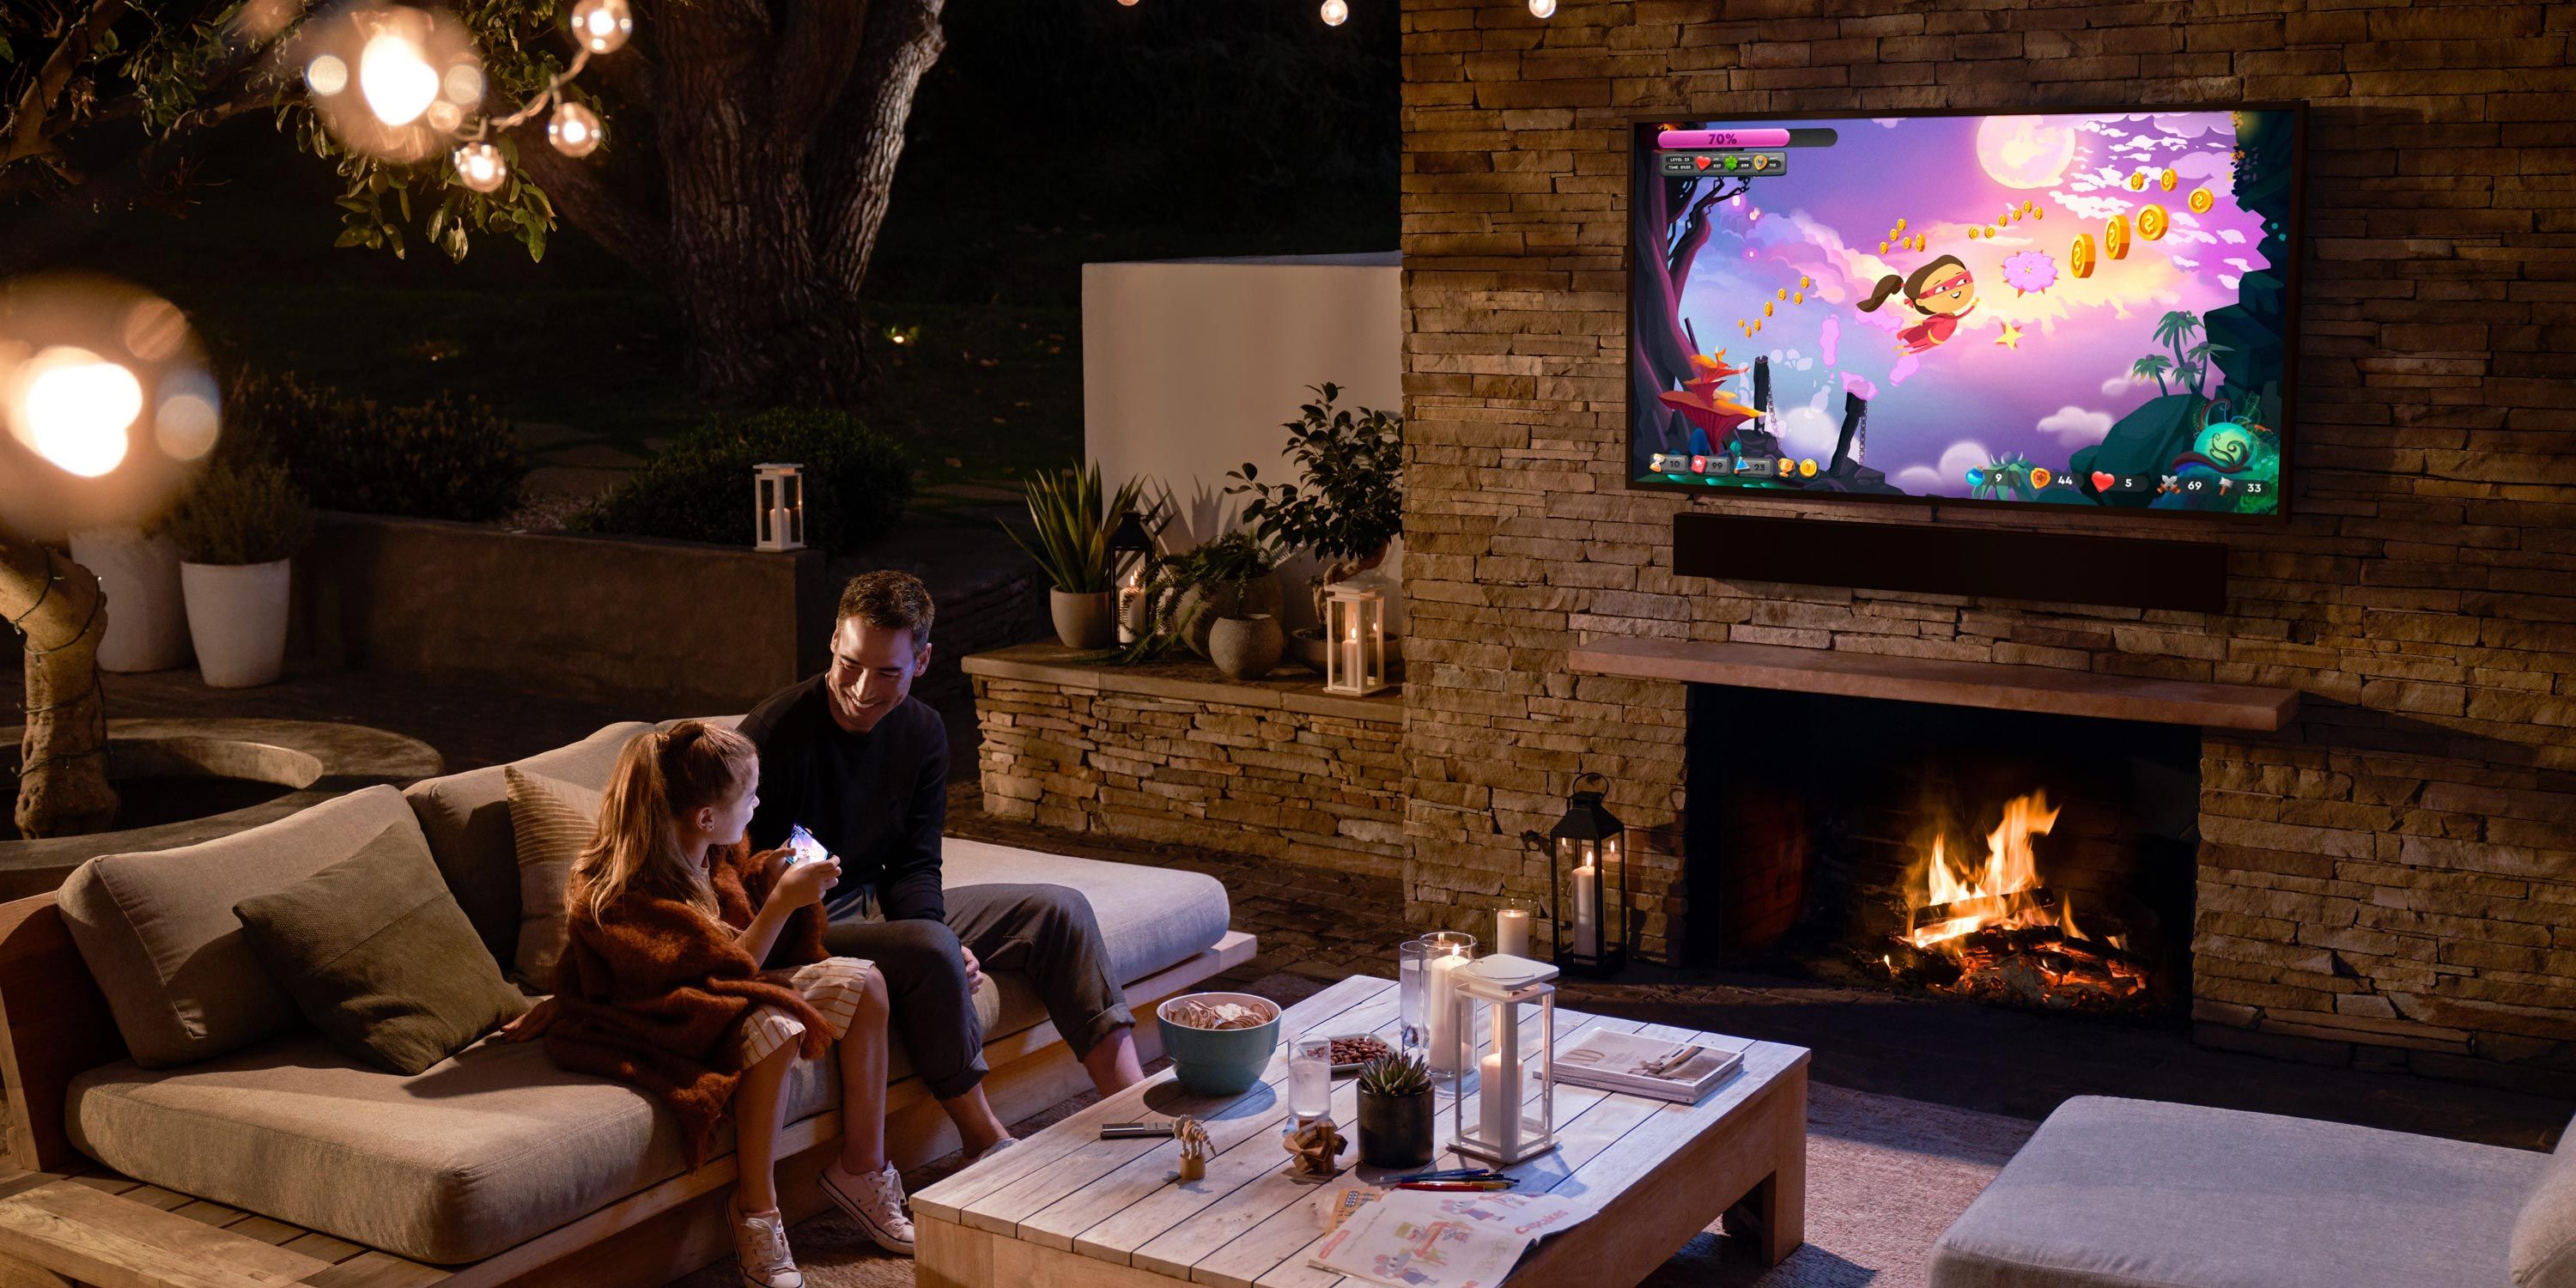 outdoor patio with samsung technology and a dad and daughter spending time together